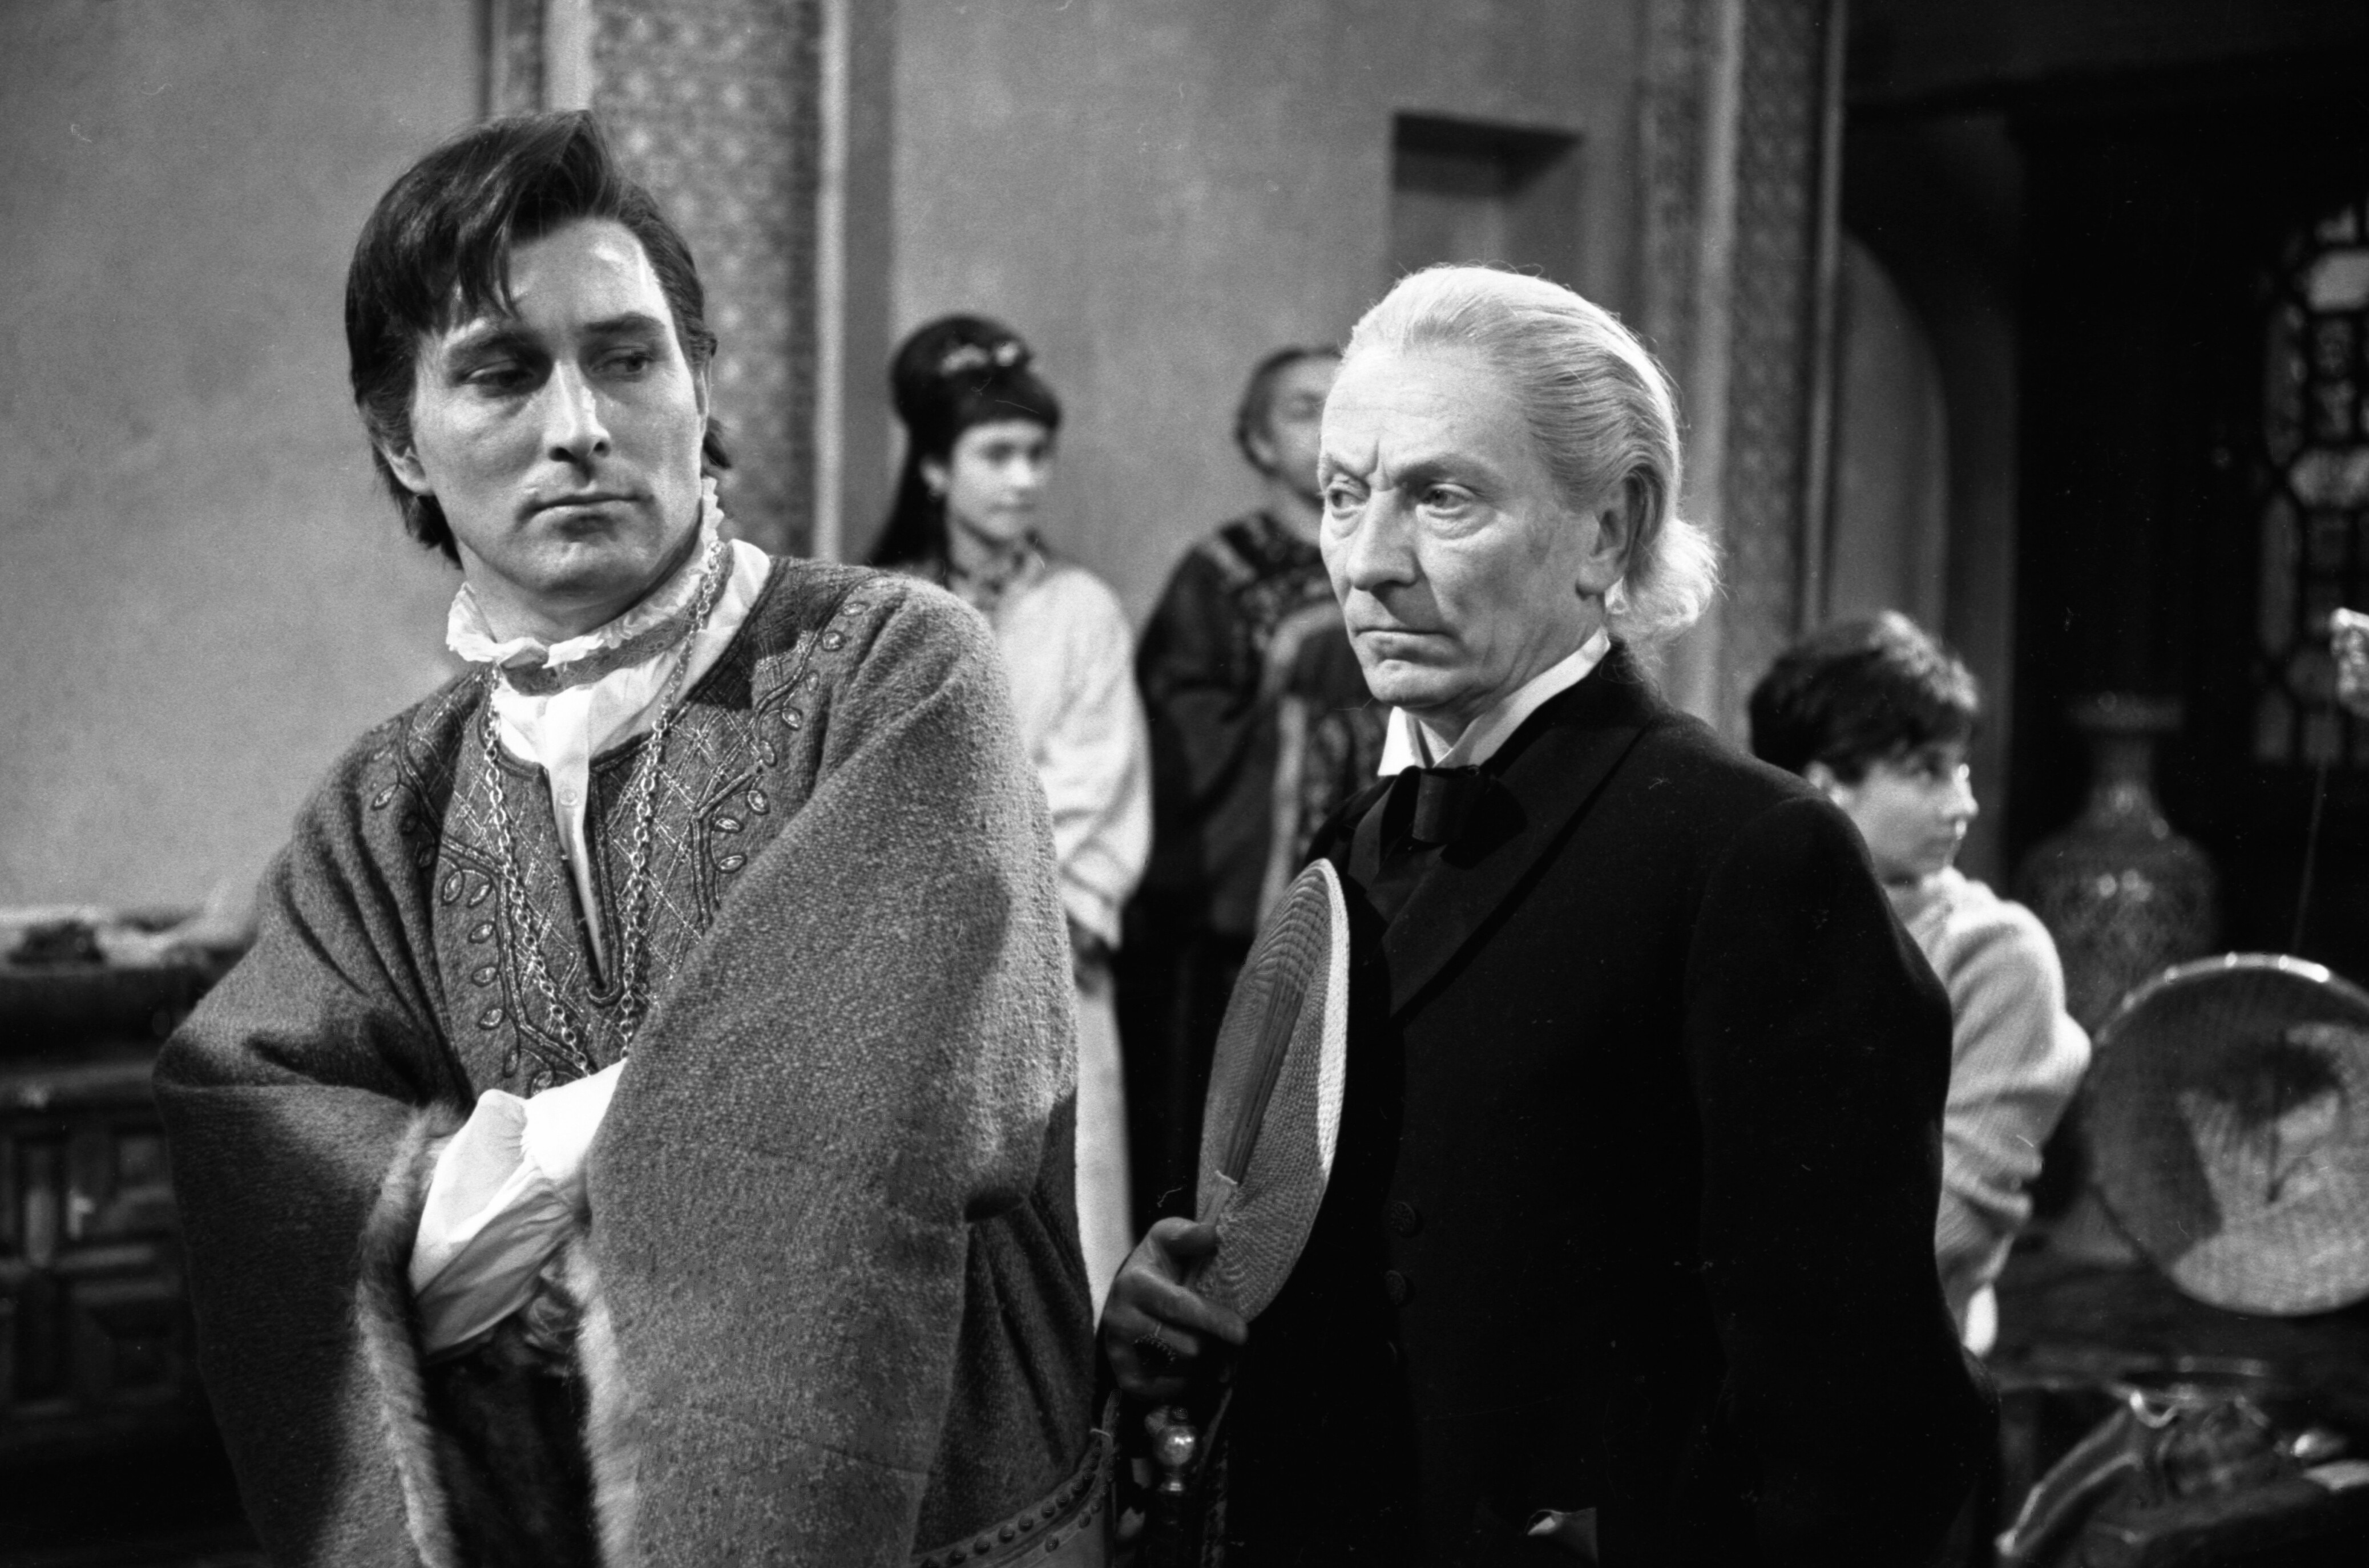 marco polo (mark eden) and the first doctor (william hartnell) in the missing doctor who story, marco polo (1964).